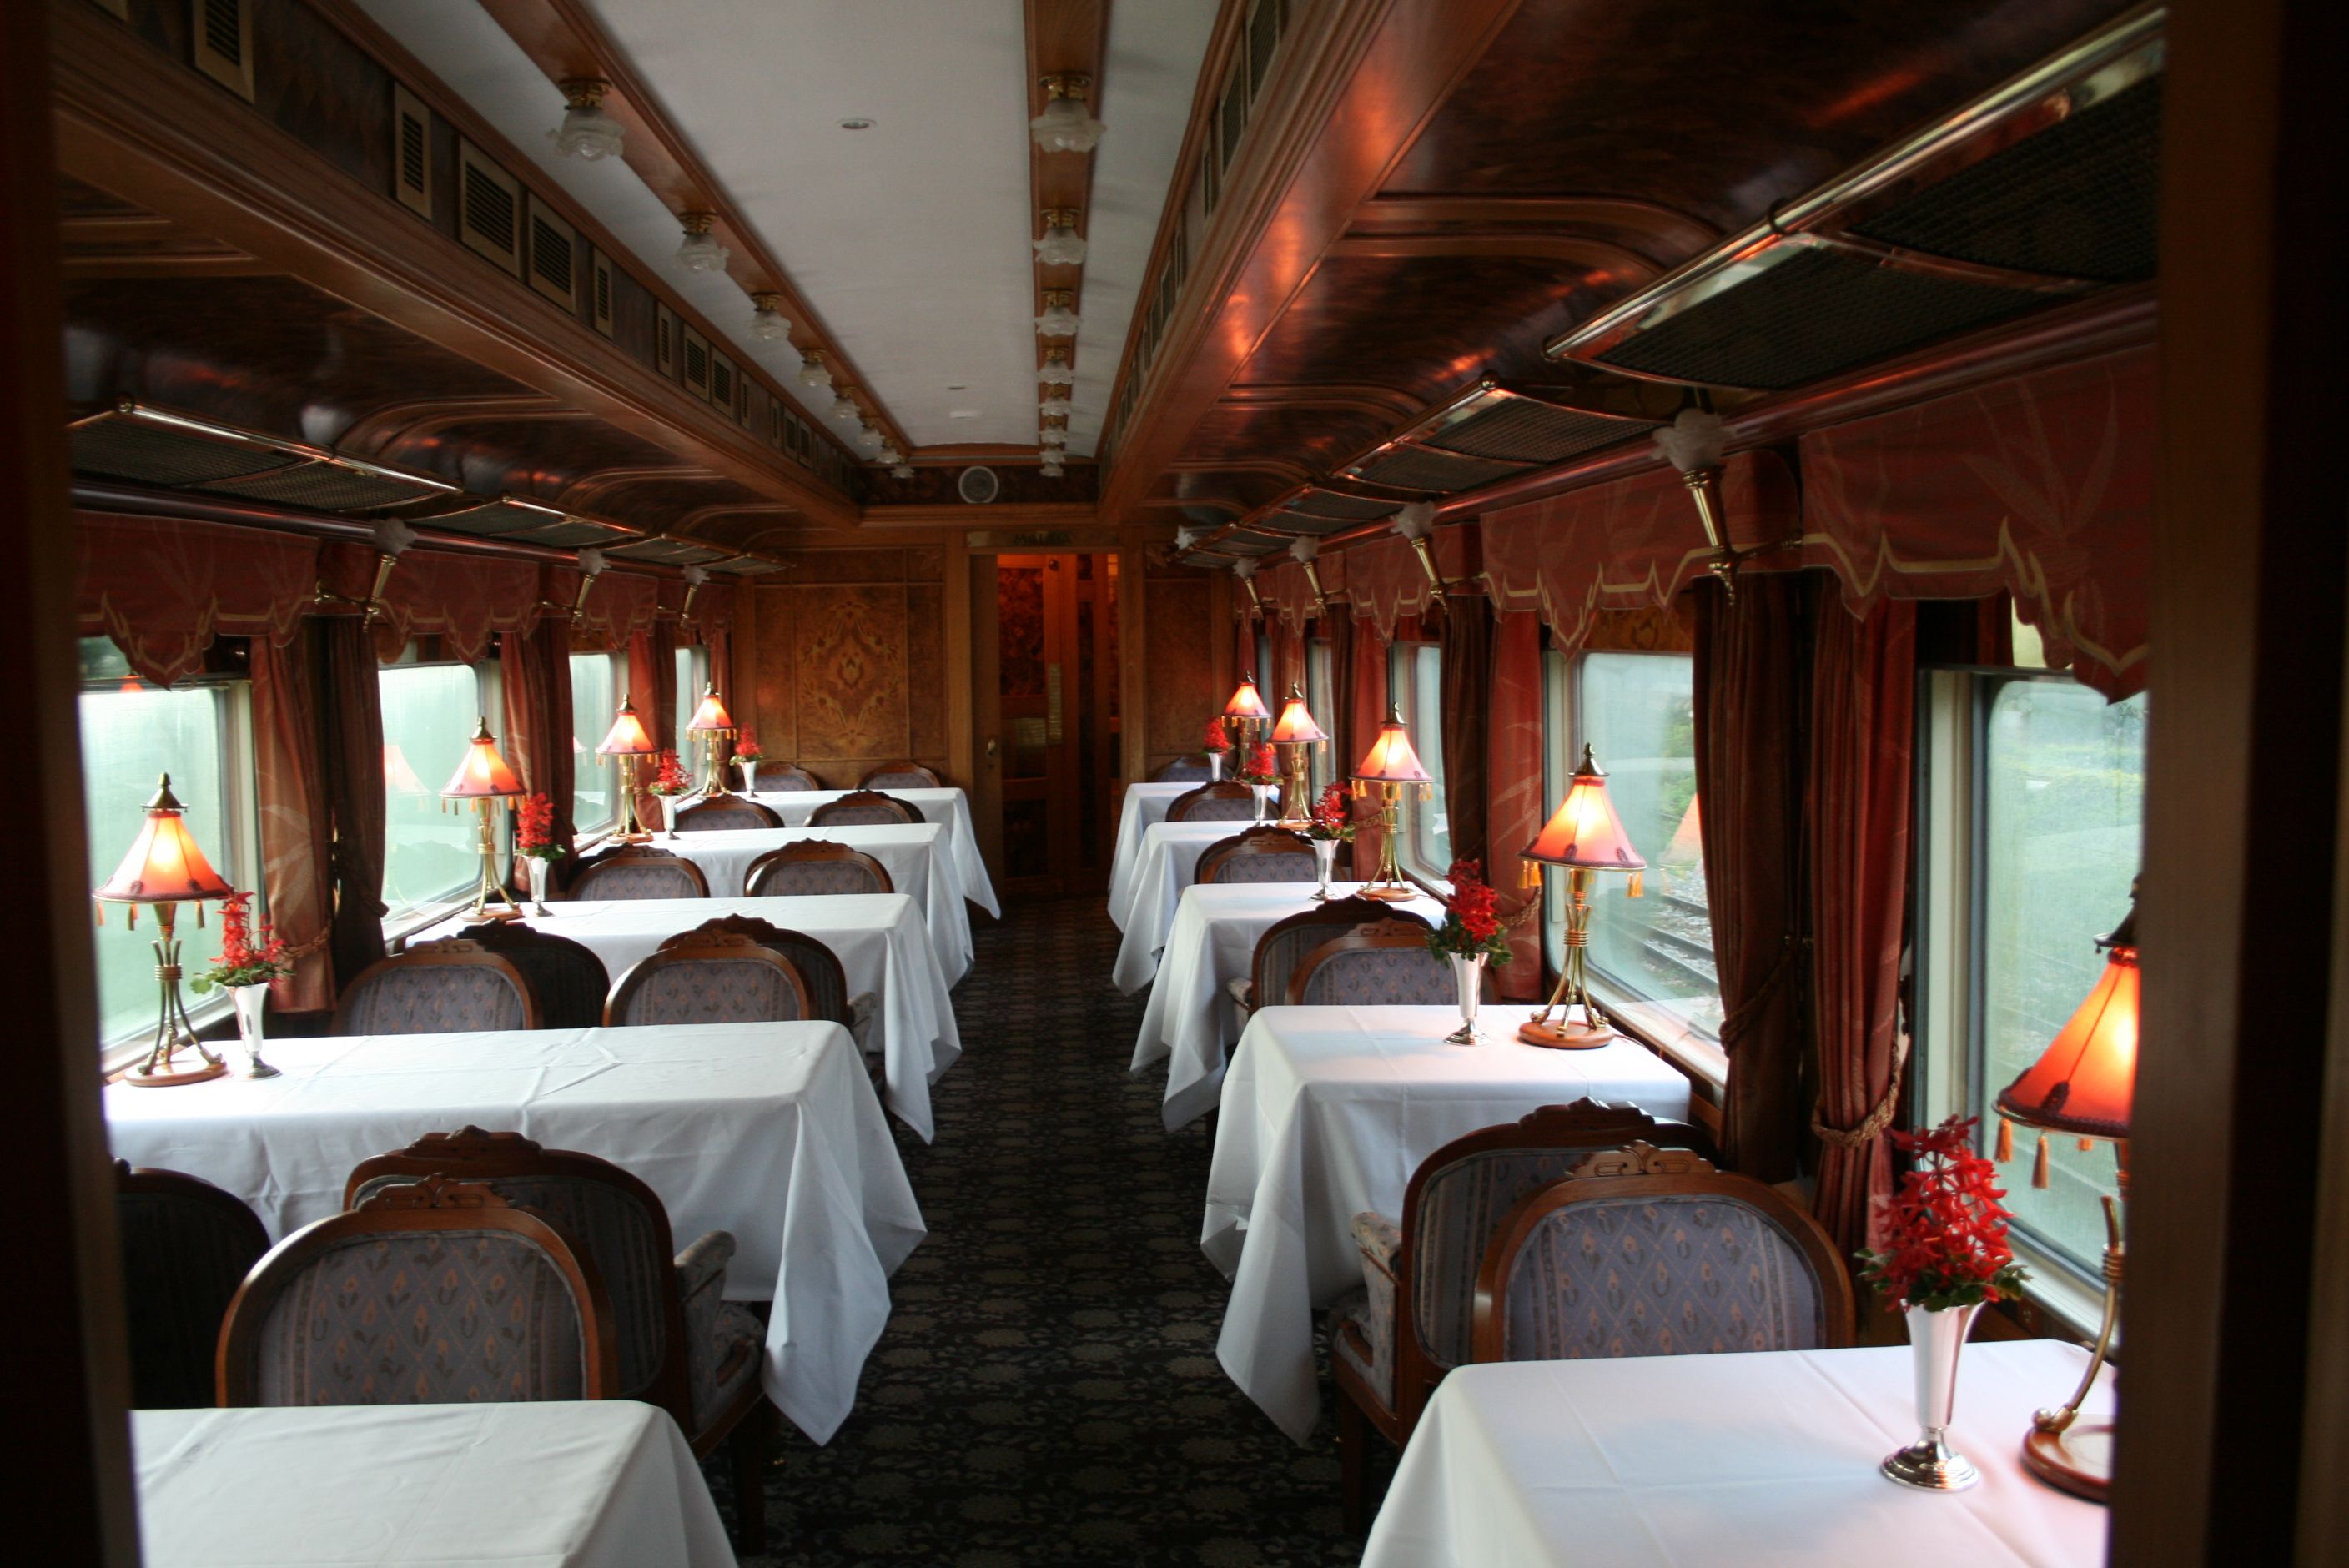 train car dining room booth